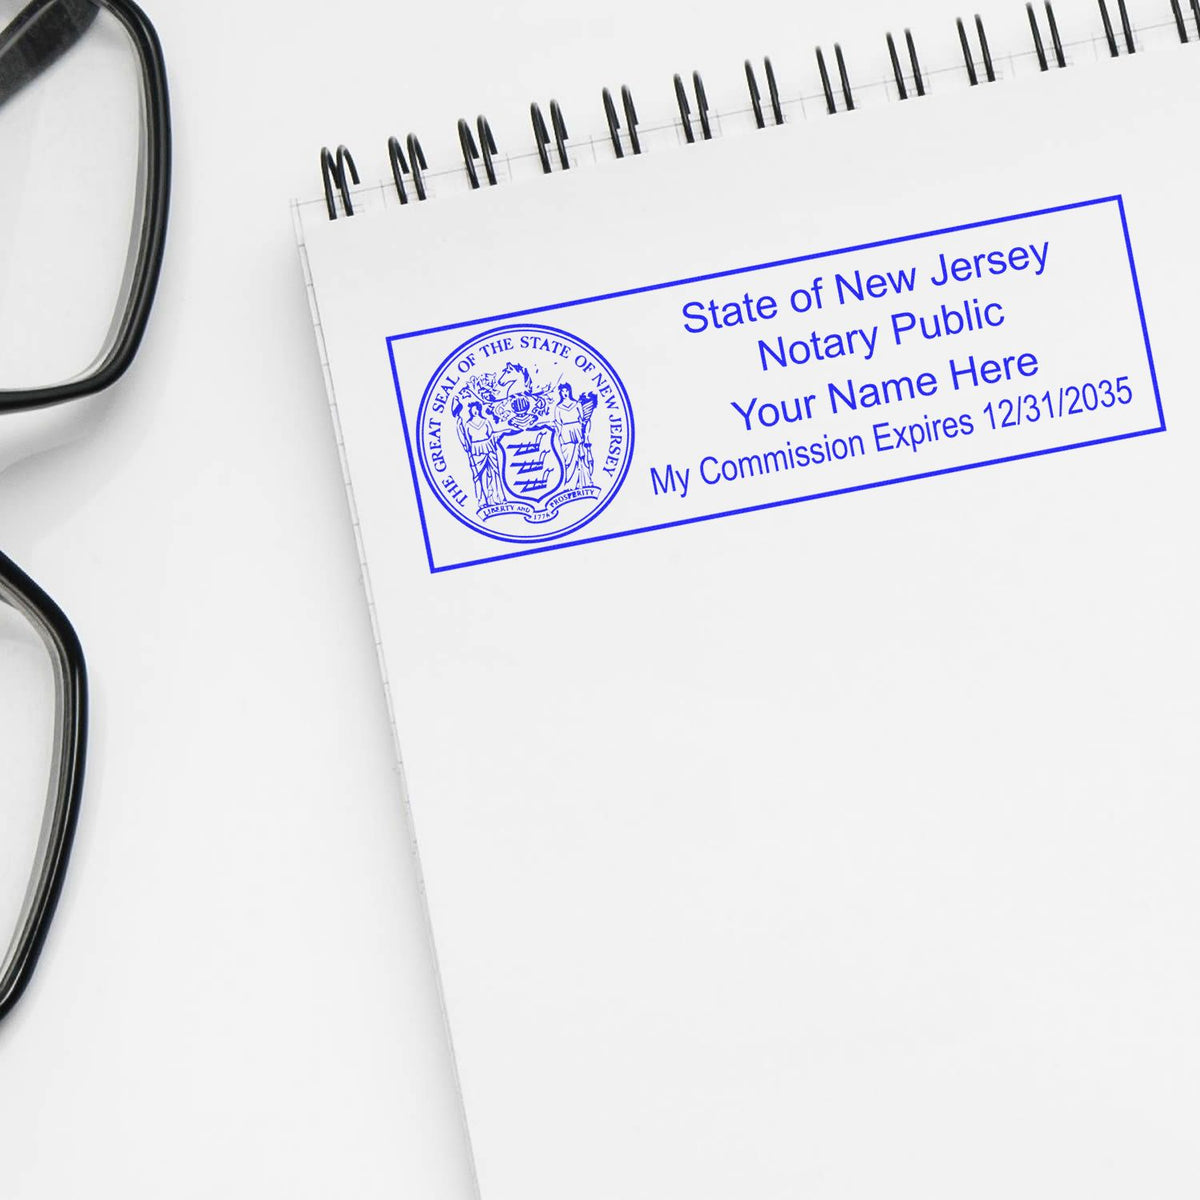 This paper is stamped with a sample imprint of the Slim Pre-Inked State Seal Notary Stamp for New Jersey, signifying its quality and reliability.